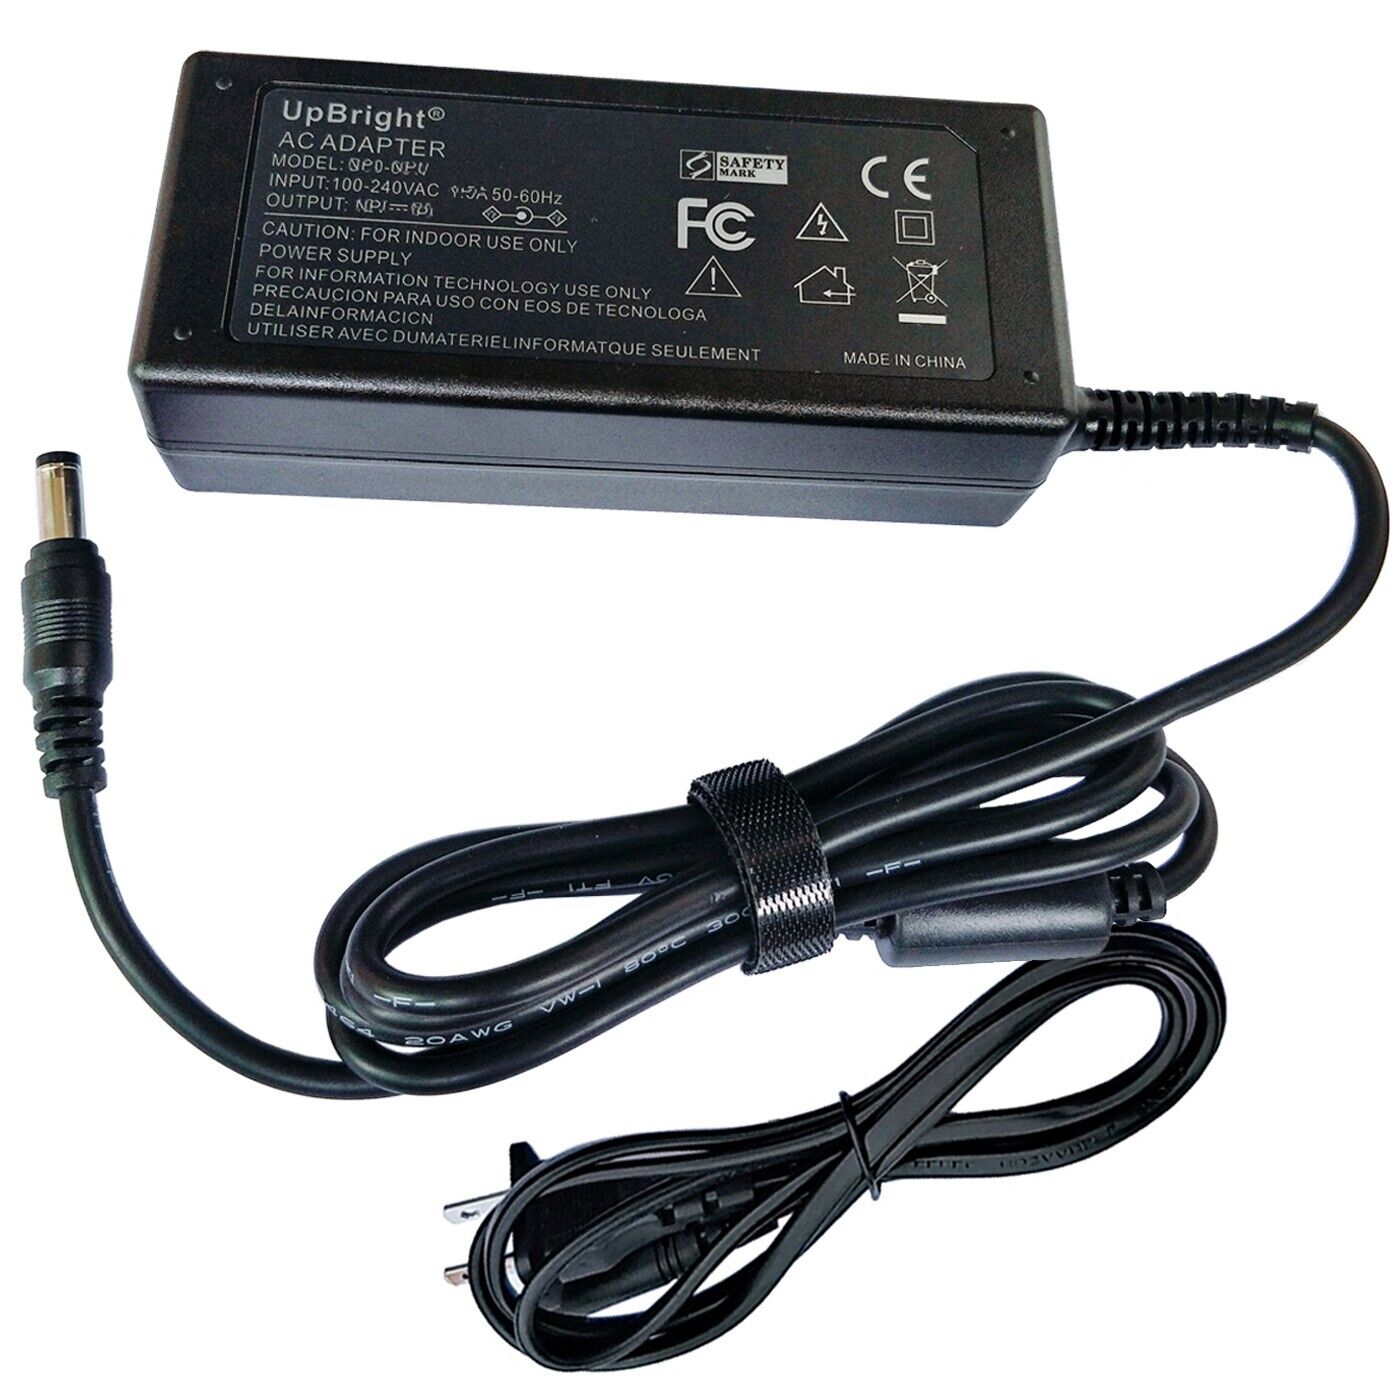 12V AC Adapter For Arcade1Up STW-A-301613 Star Wars Arcade Game 40th Anniversary